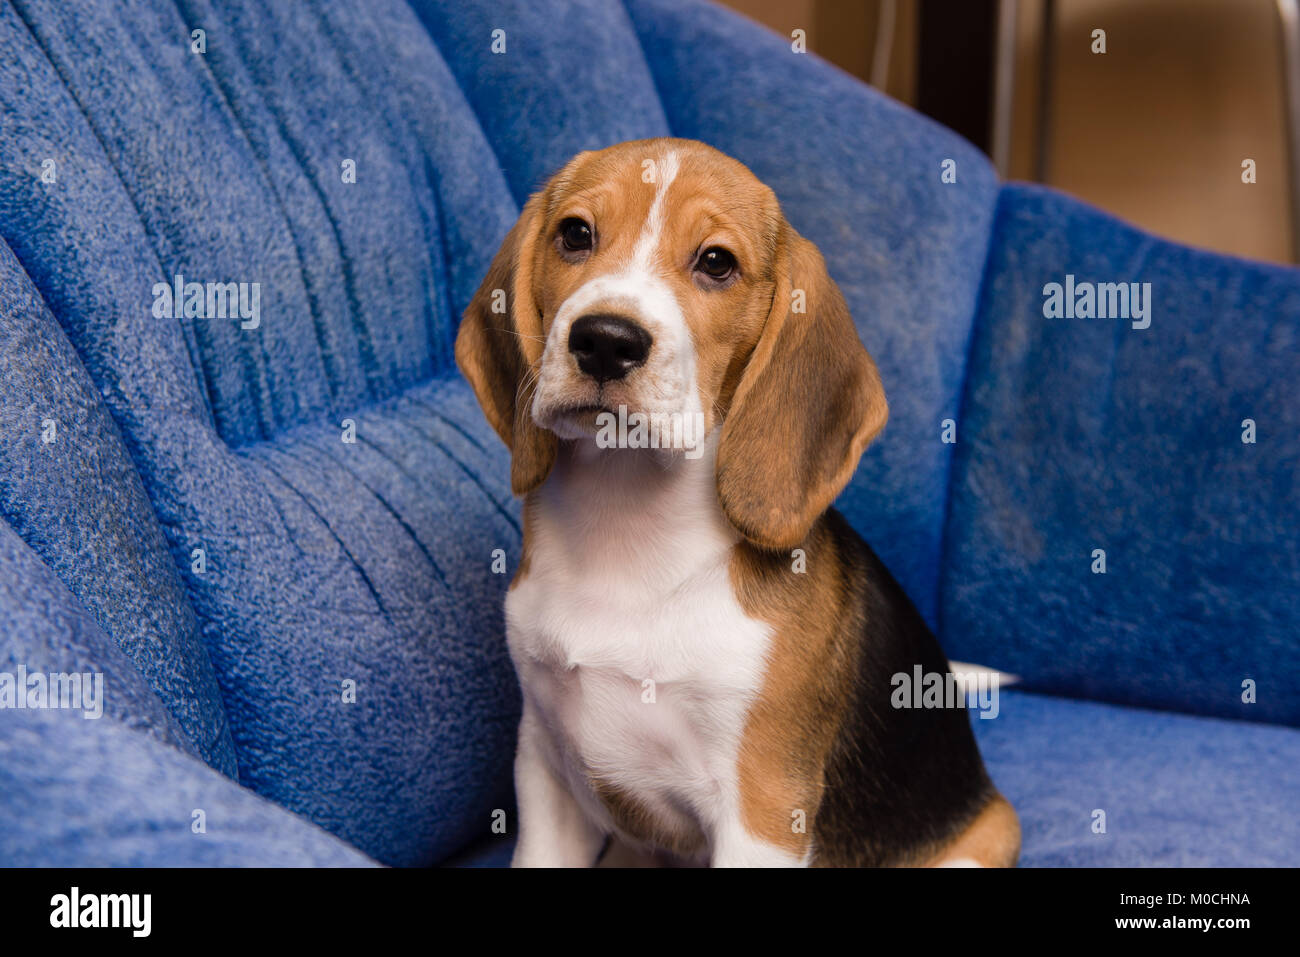 Beagle dog posing in soft blue chair indoors Stock Photo